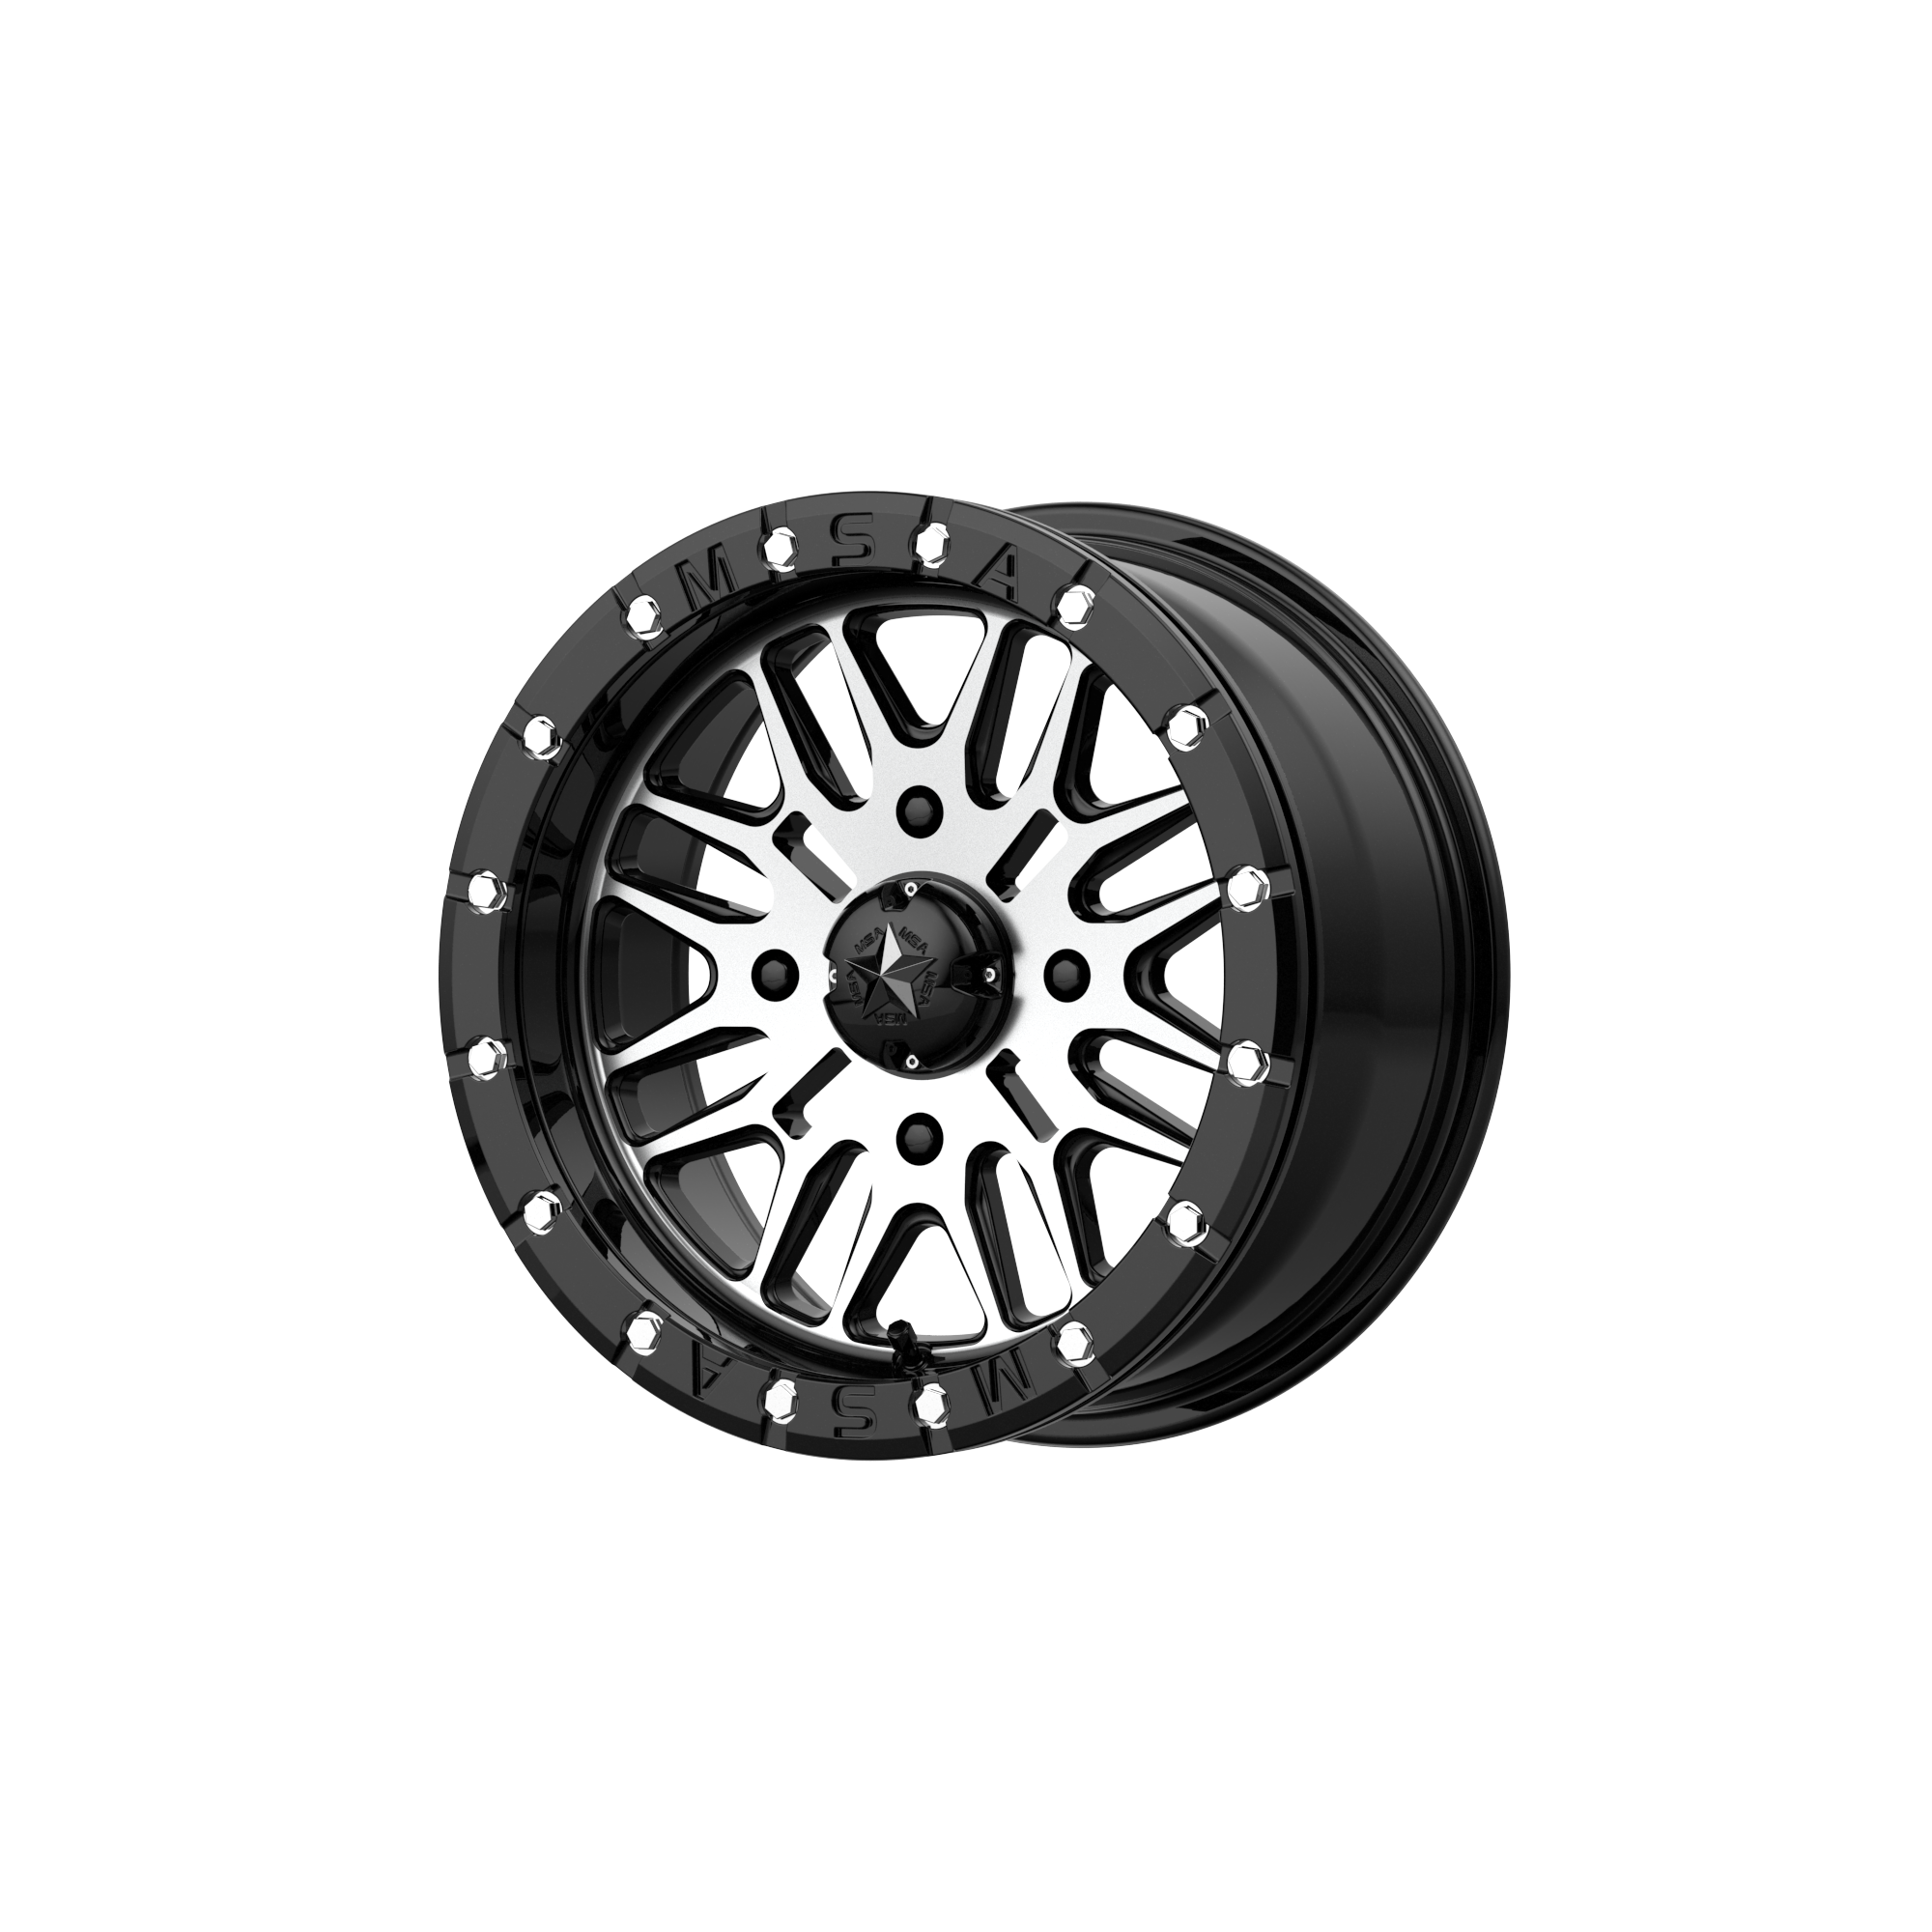 BRUTE BEADLOCK 14x7 4x156.00 GLOSS BLACK MACHINED (10 mm) - Tires and Engine Performance